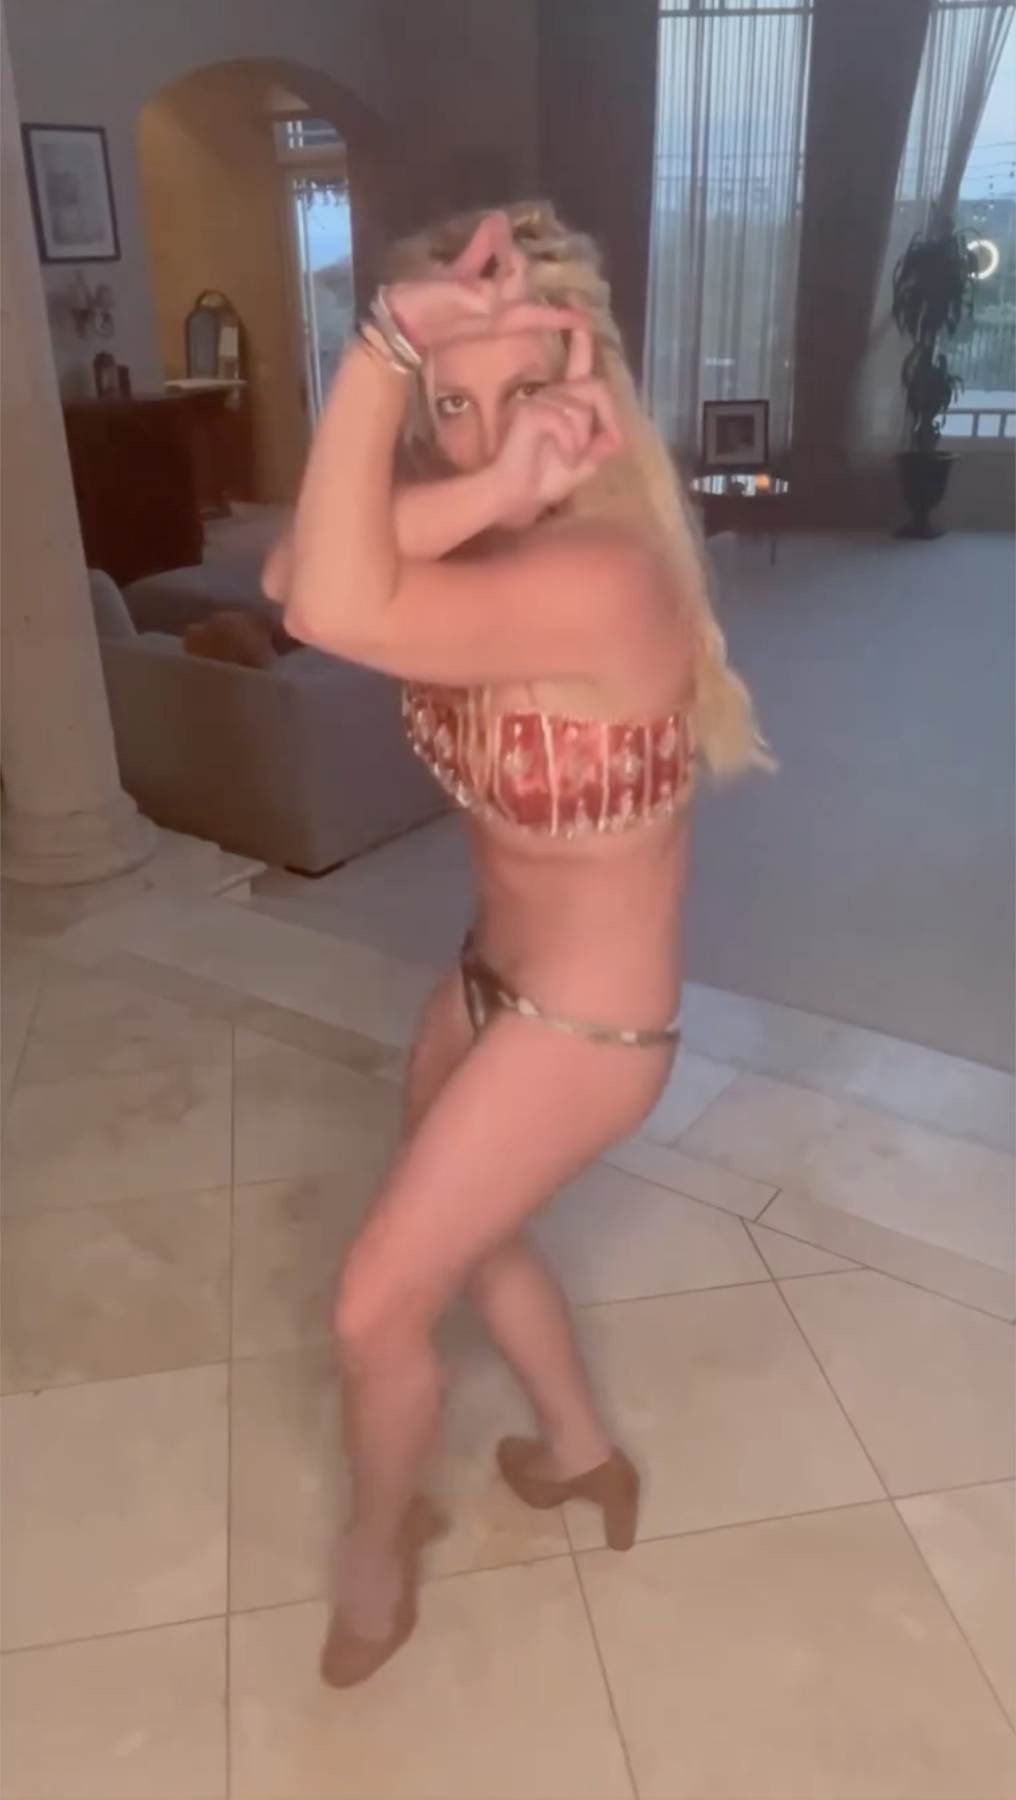 Britney wore her bikini bottoms dangerously low while dancing to Madonna's I'm Addicted